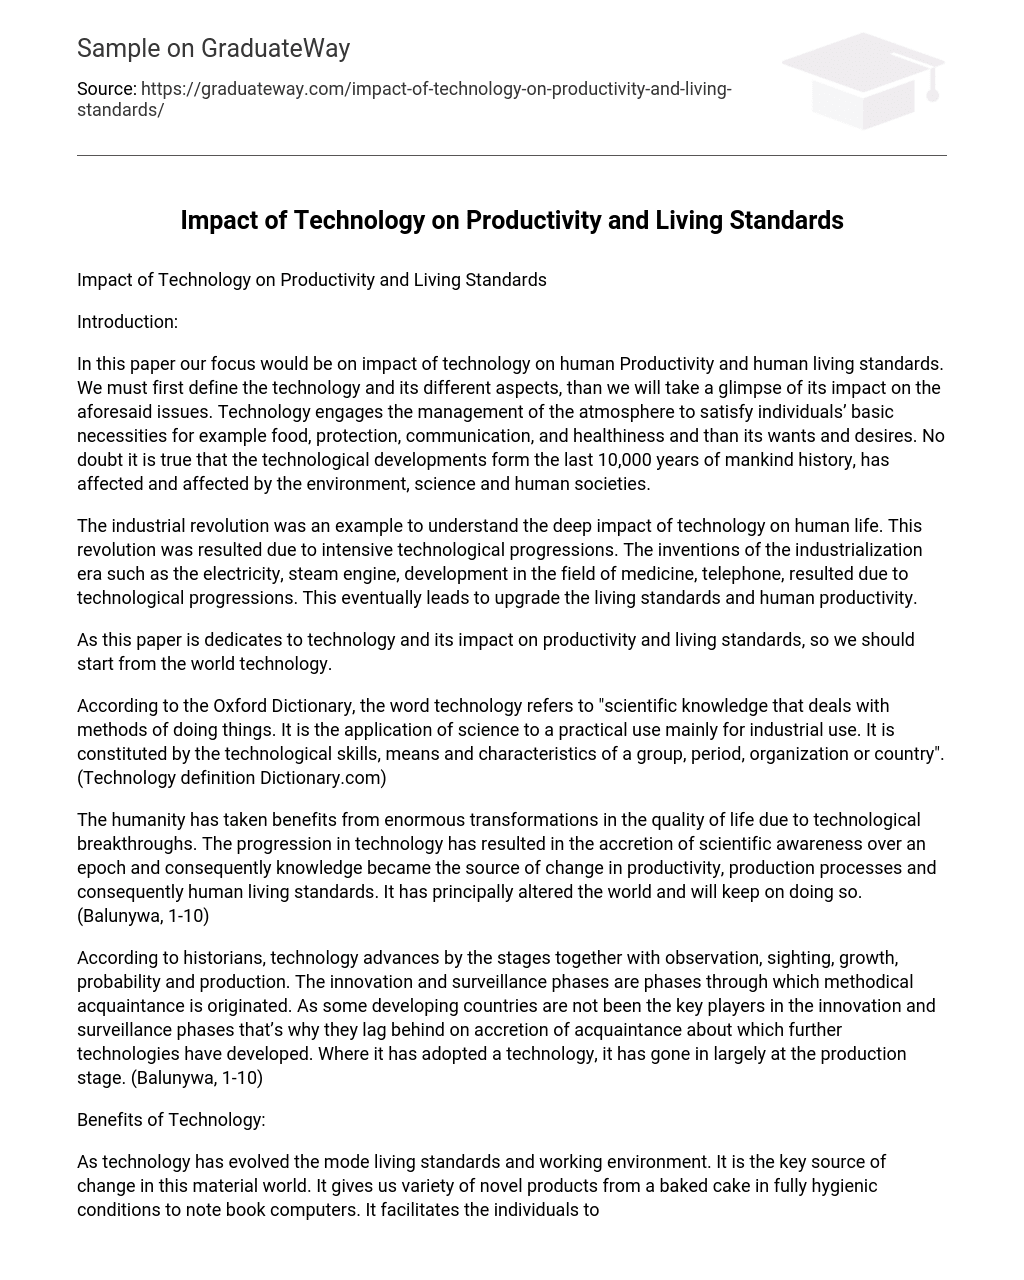 Impact of Technology on Productivity and Living Standards